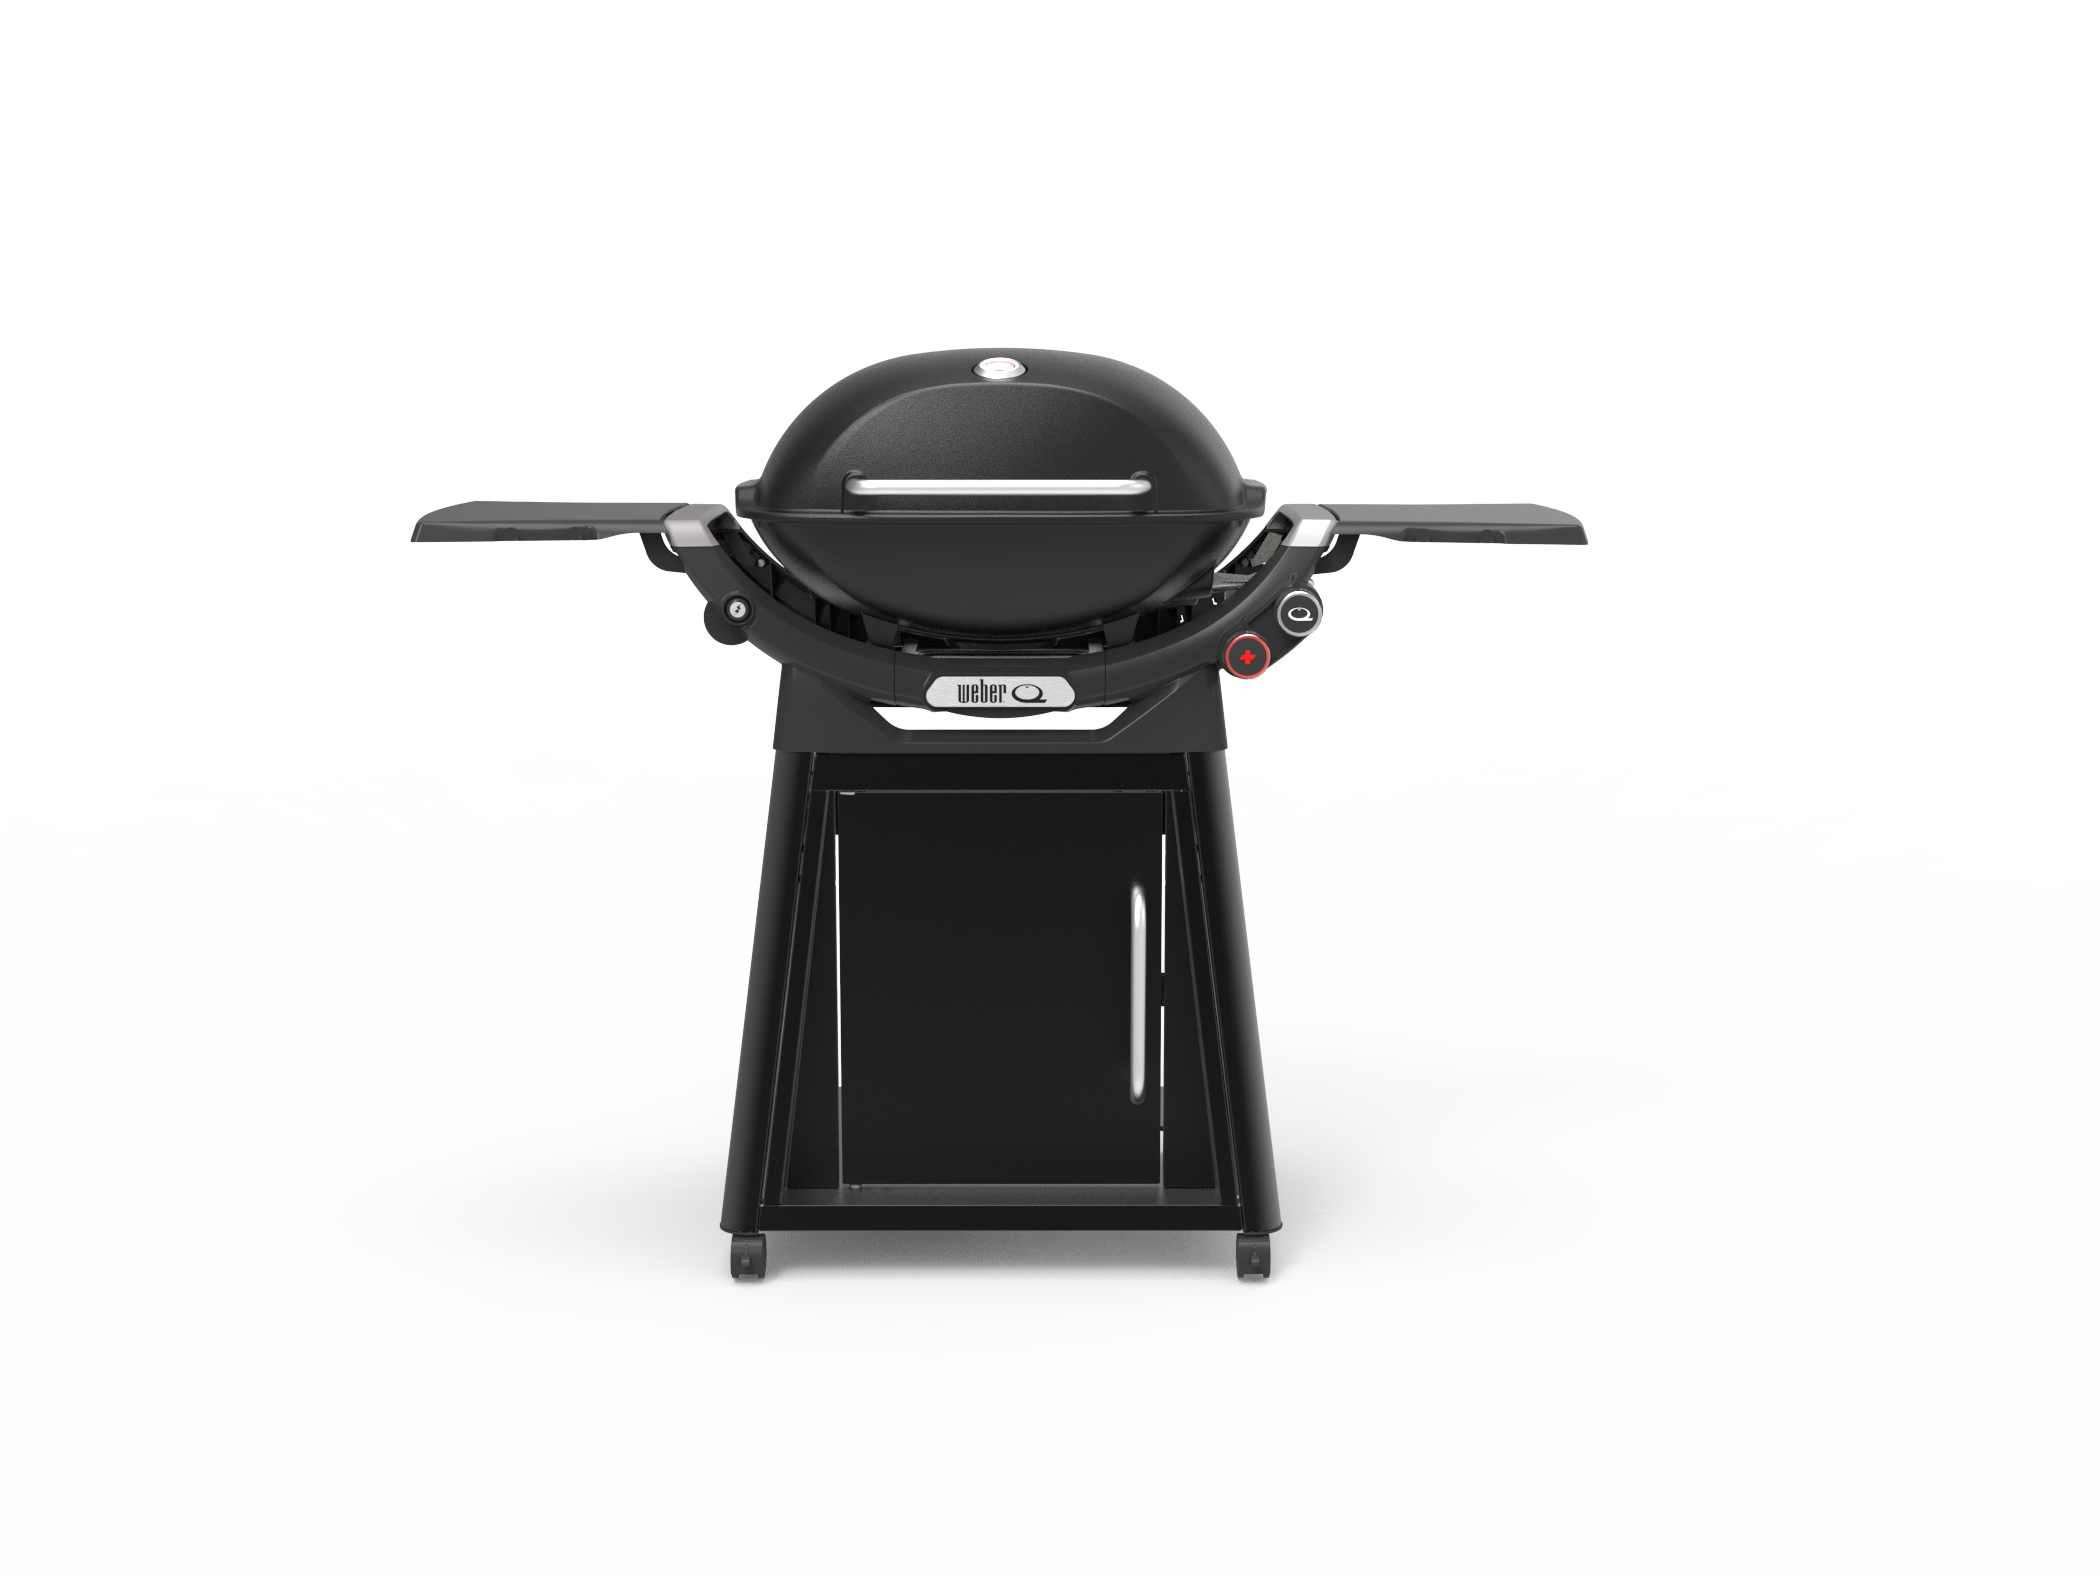 Weber Q 3200N plus front view in midnight black colour